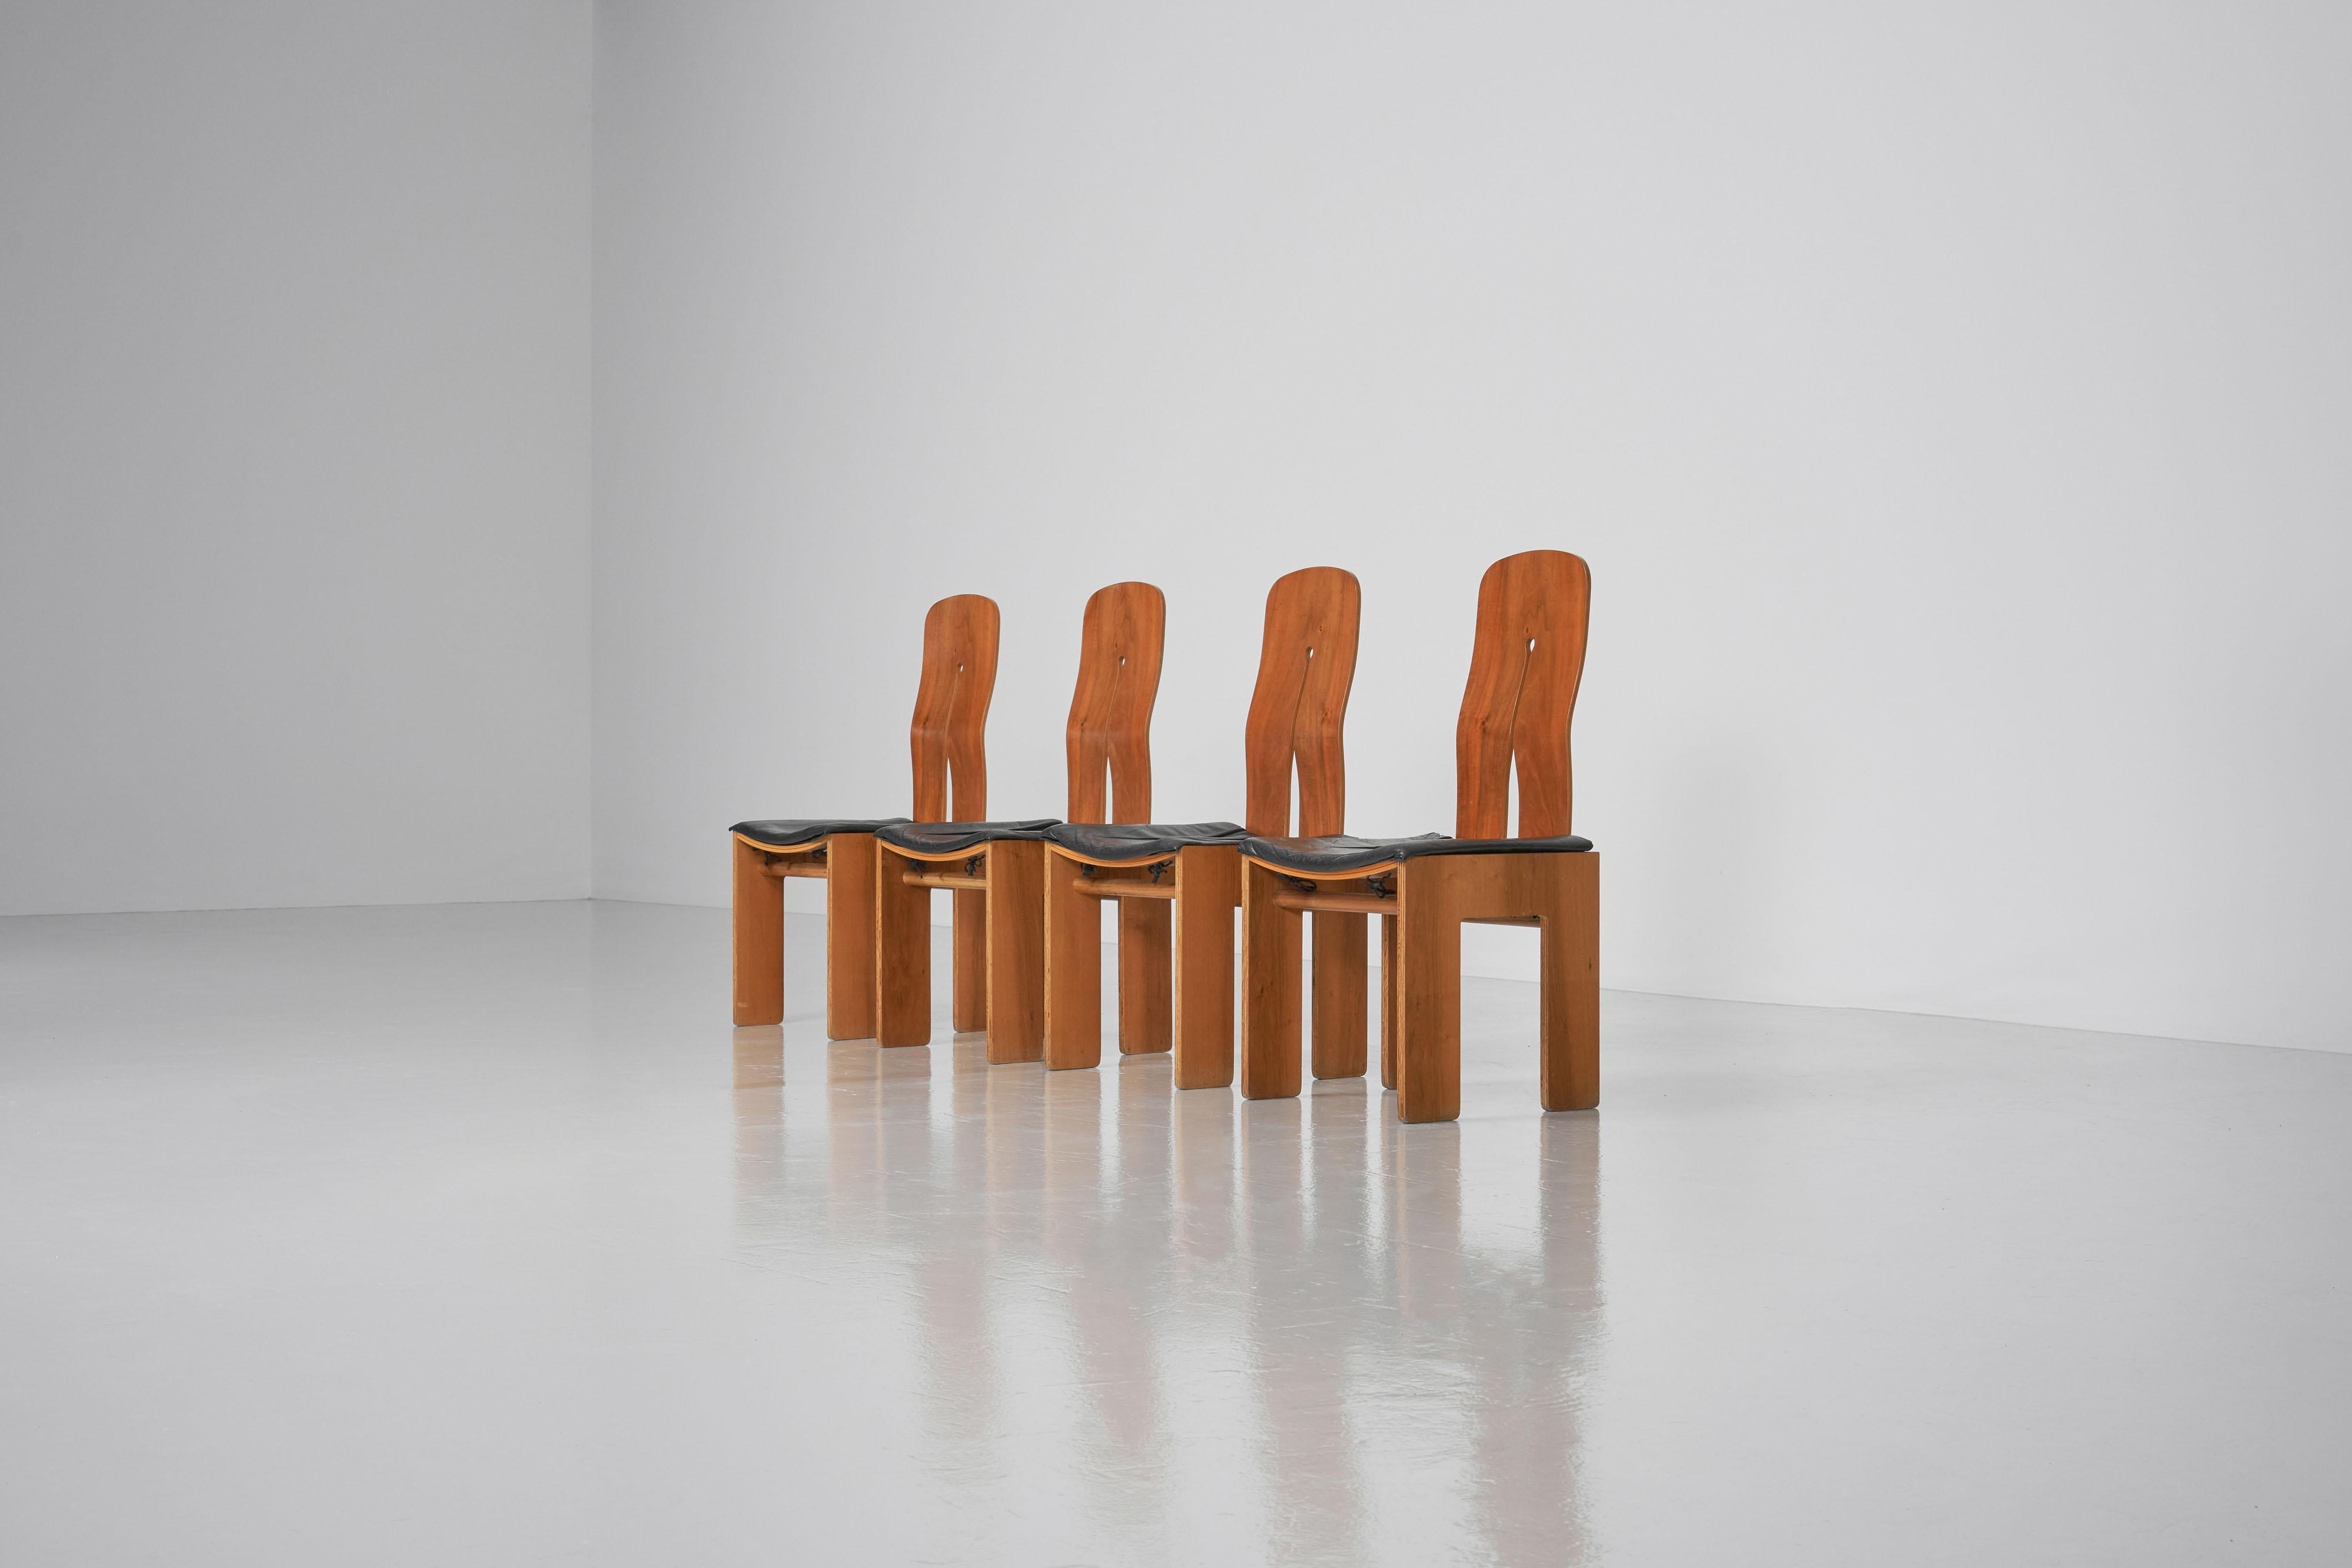 Fantastic proportioned model 765 chairs designed by Carlo Scarpa and manufactured by Bernini, Italy 1934. Yes that’s right, this design already dates back to 1934. That’s why Carlo Scarpa is one of the best mid-century designers of Italy, he was a